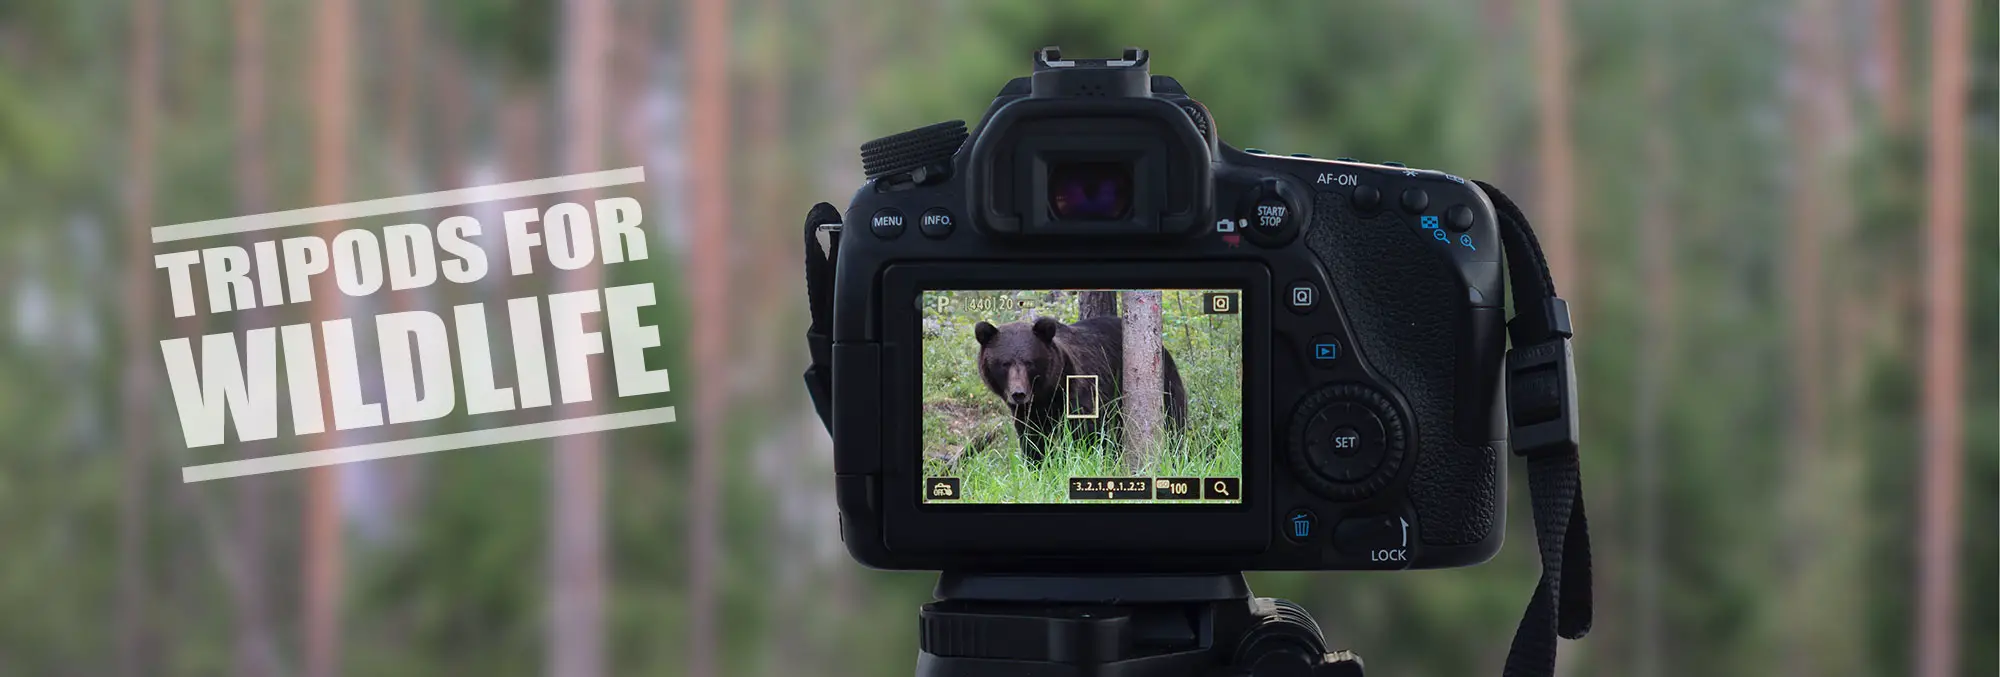 Best Tripod for Wildlife Photography - Our 5 Top Picks